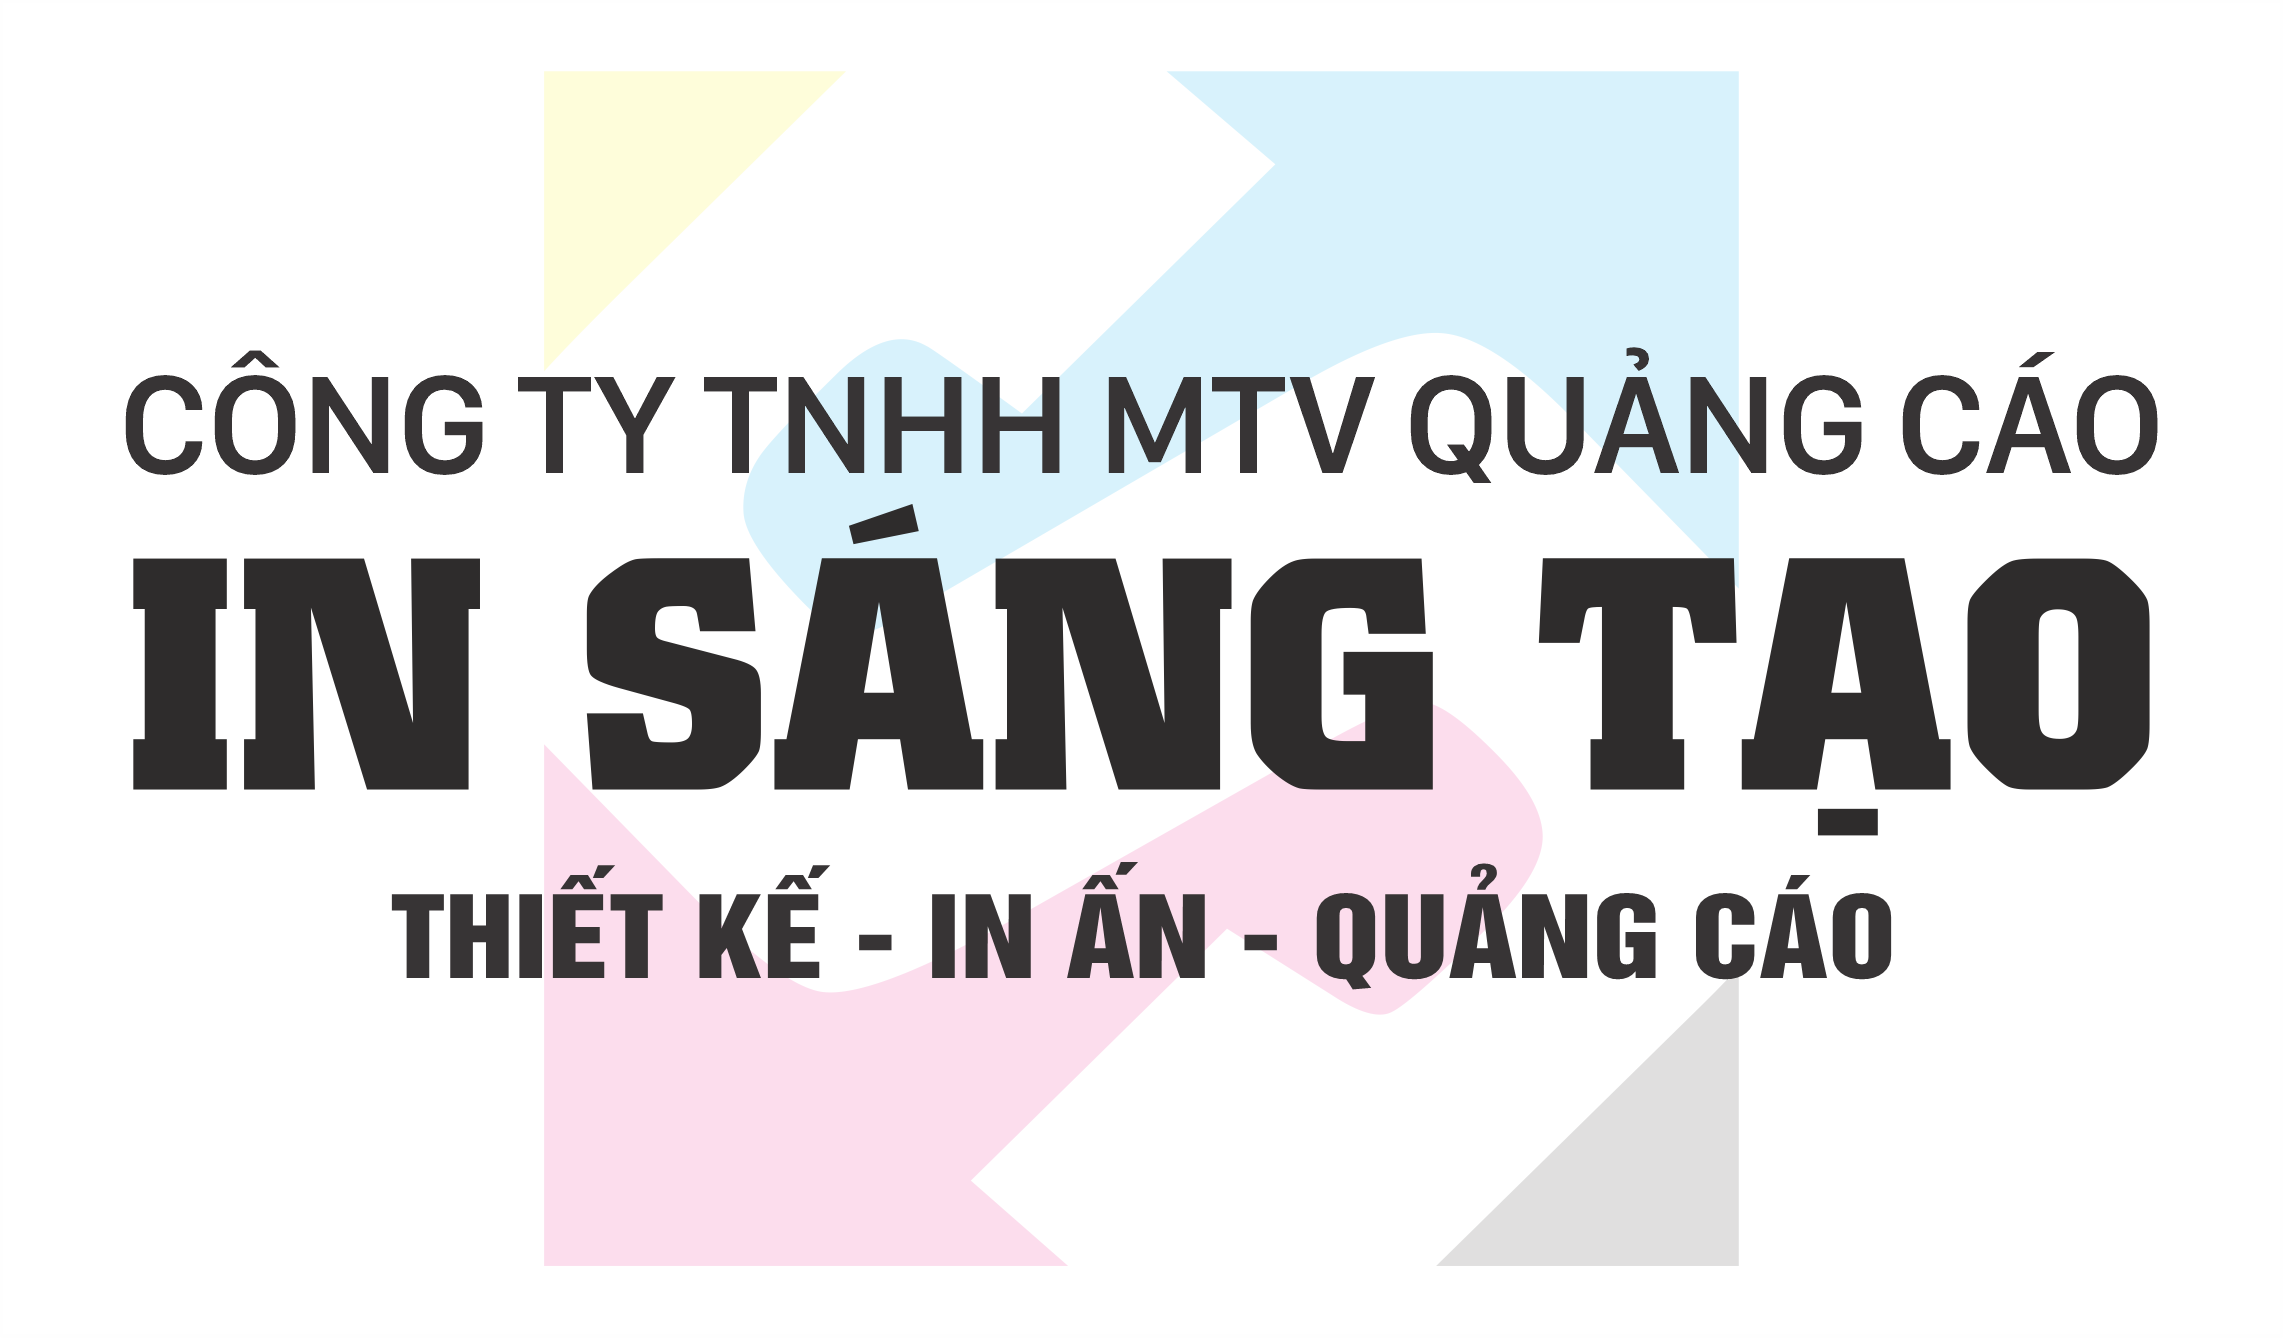 In Sáng Tạo